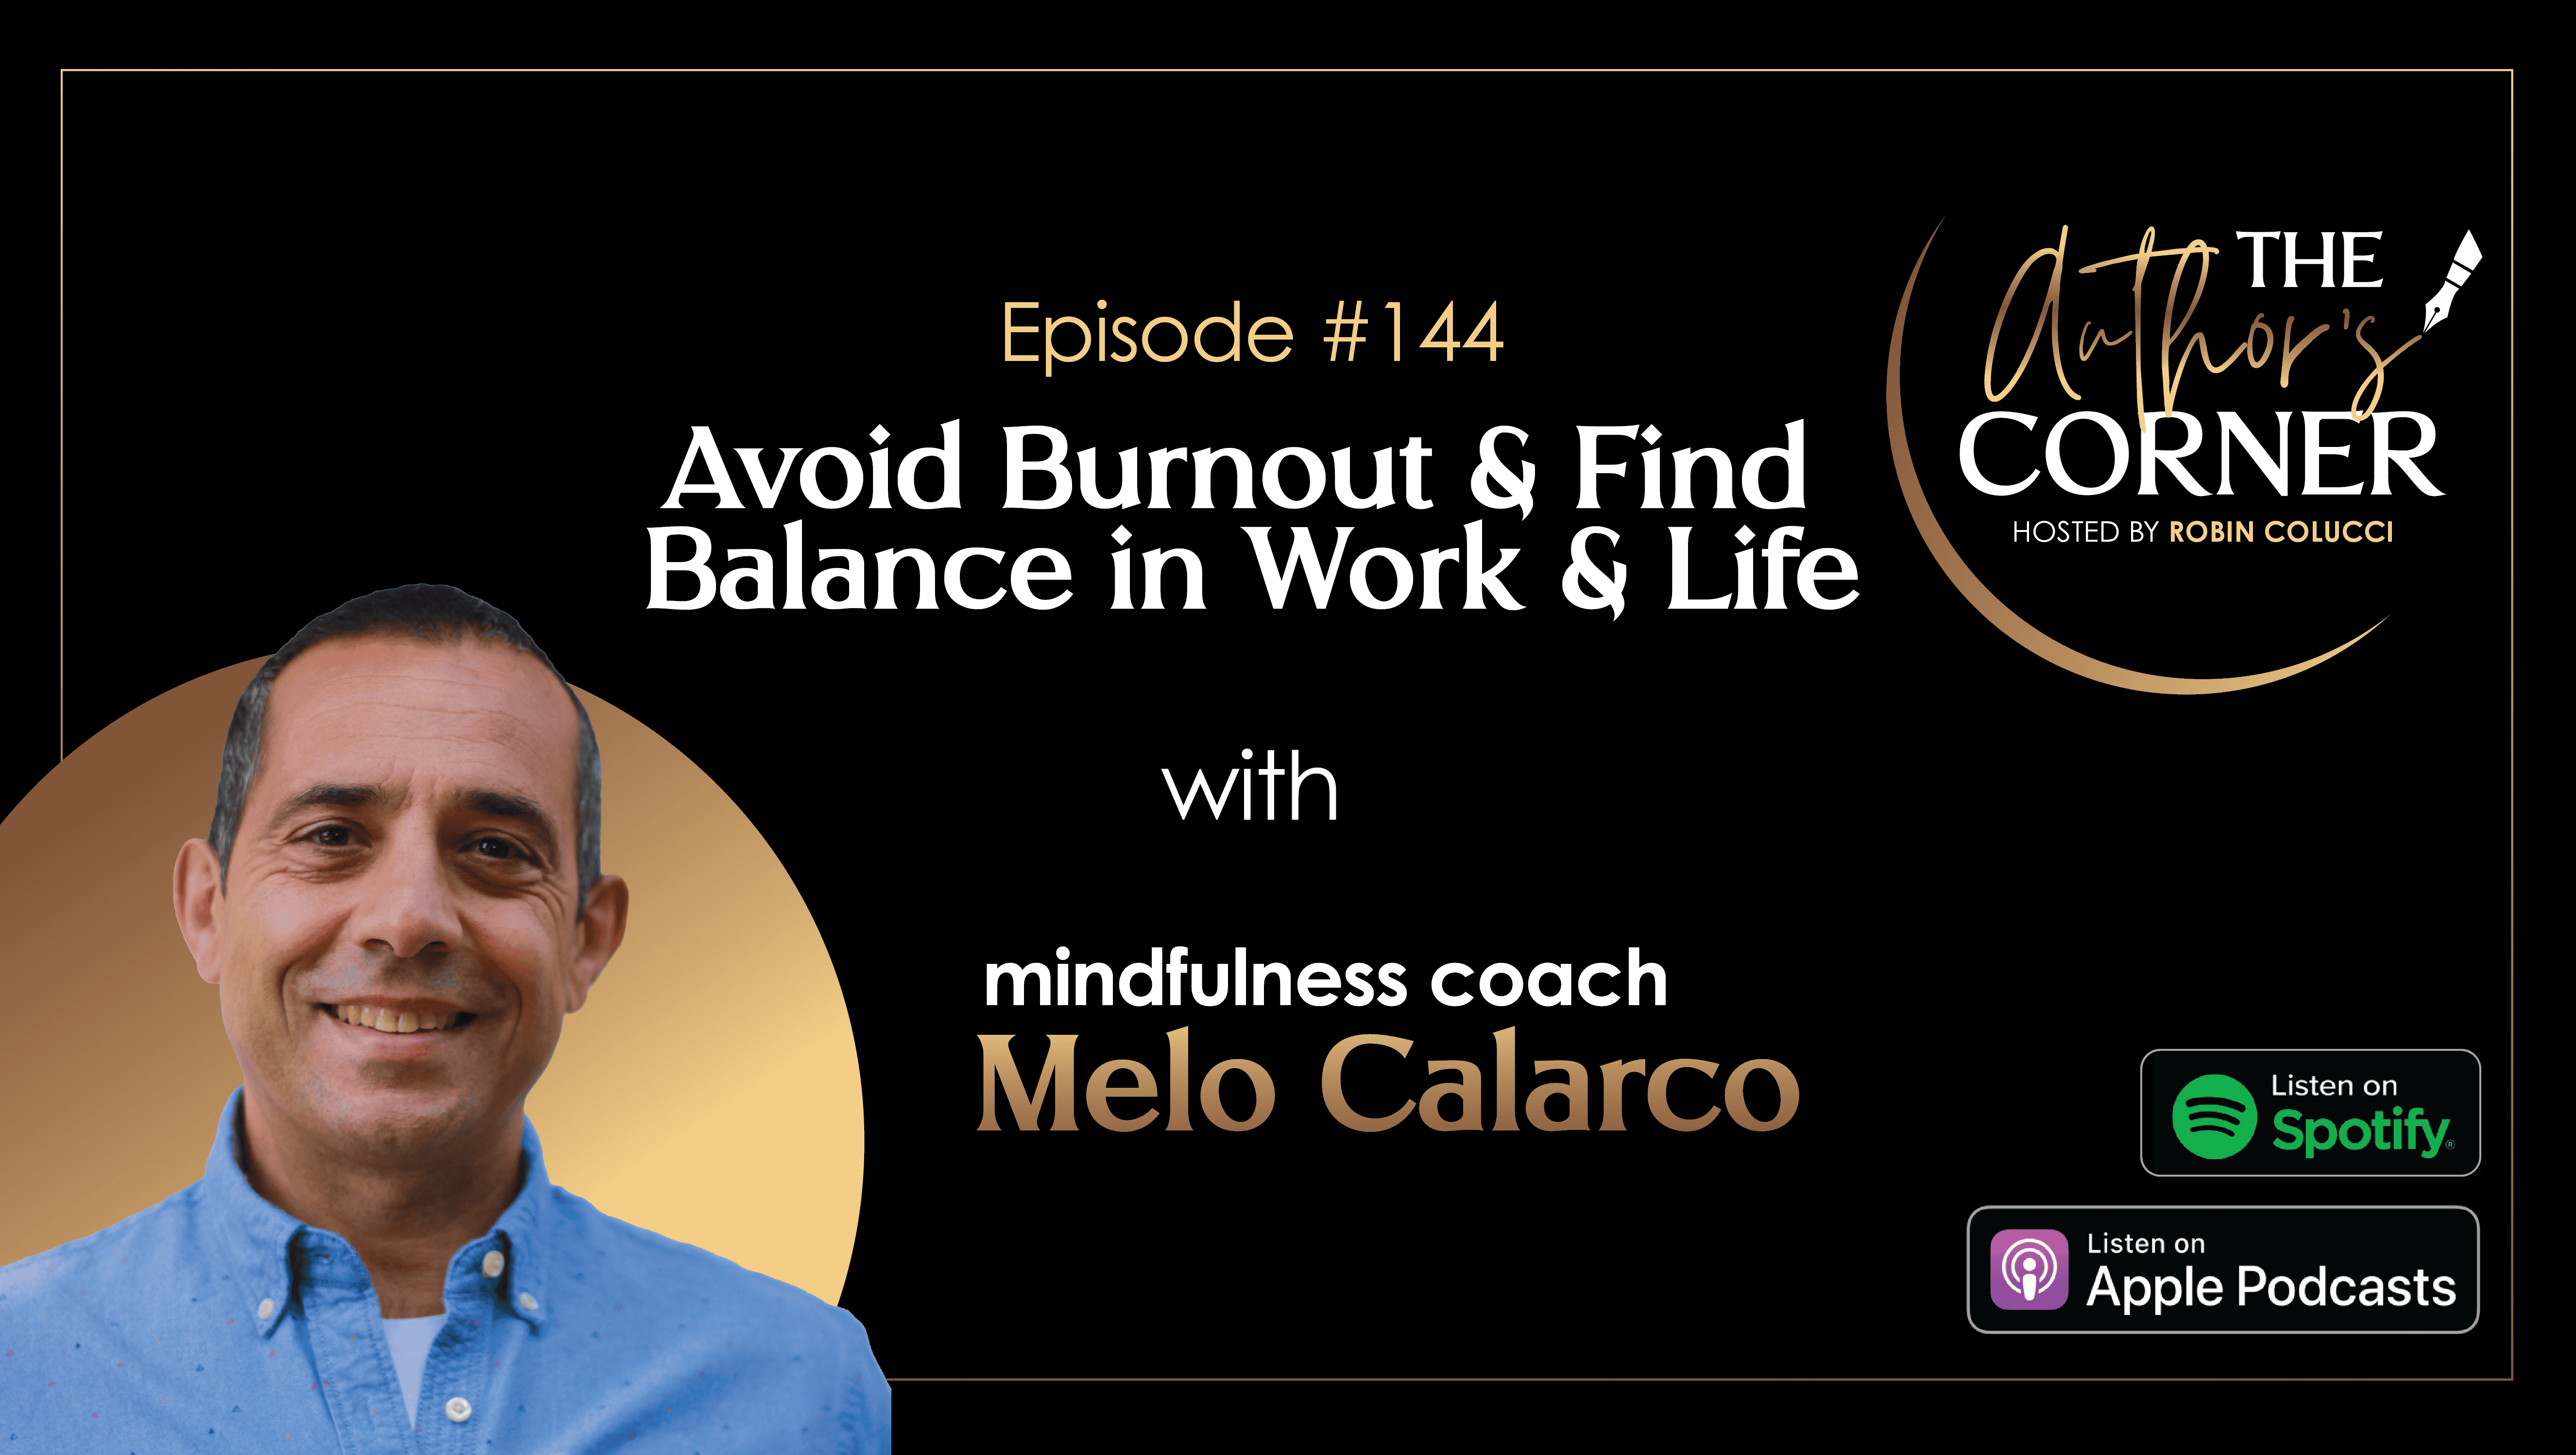 Burnout with Melo Calarco